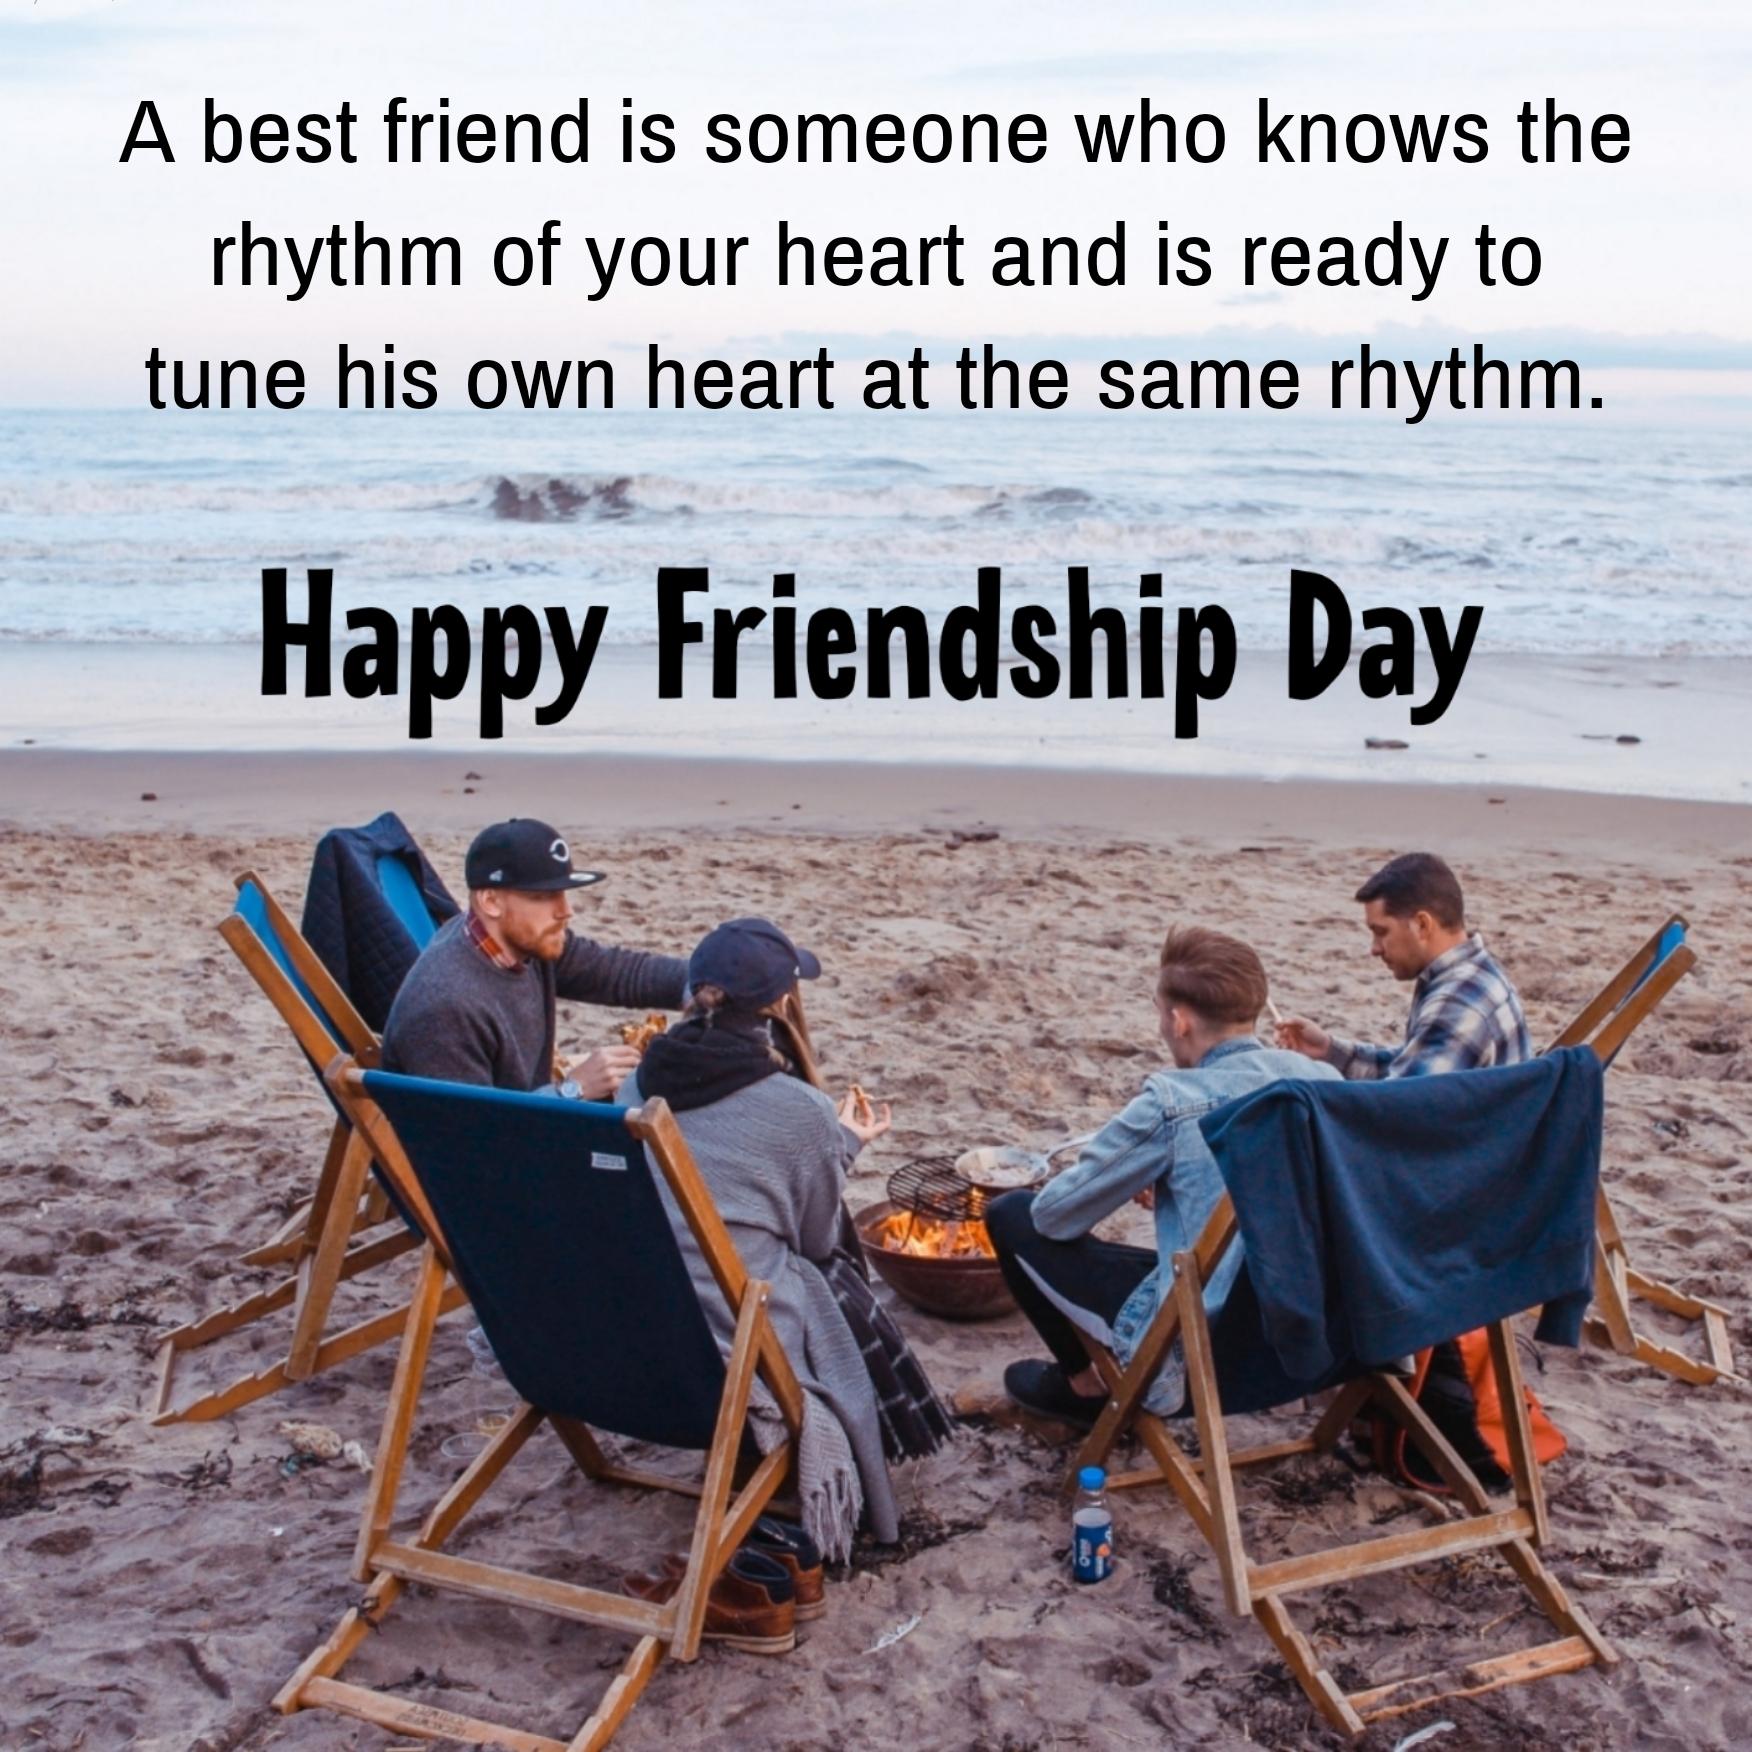 A best friend is someone who knows the rhythm of your heart